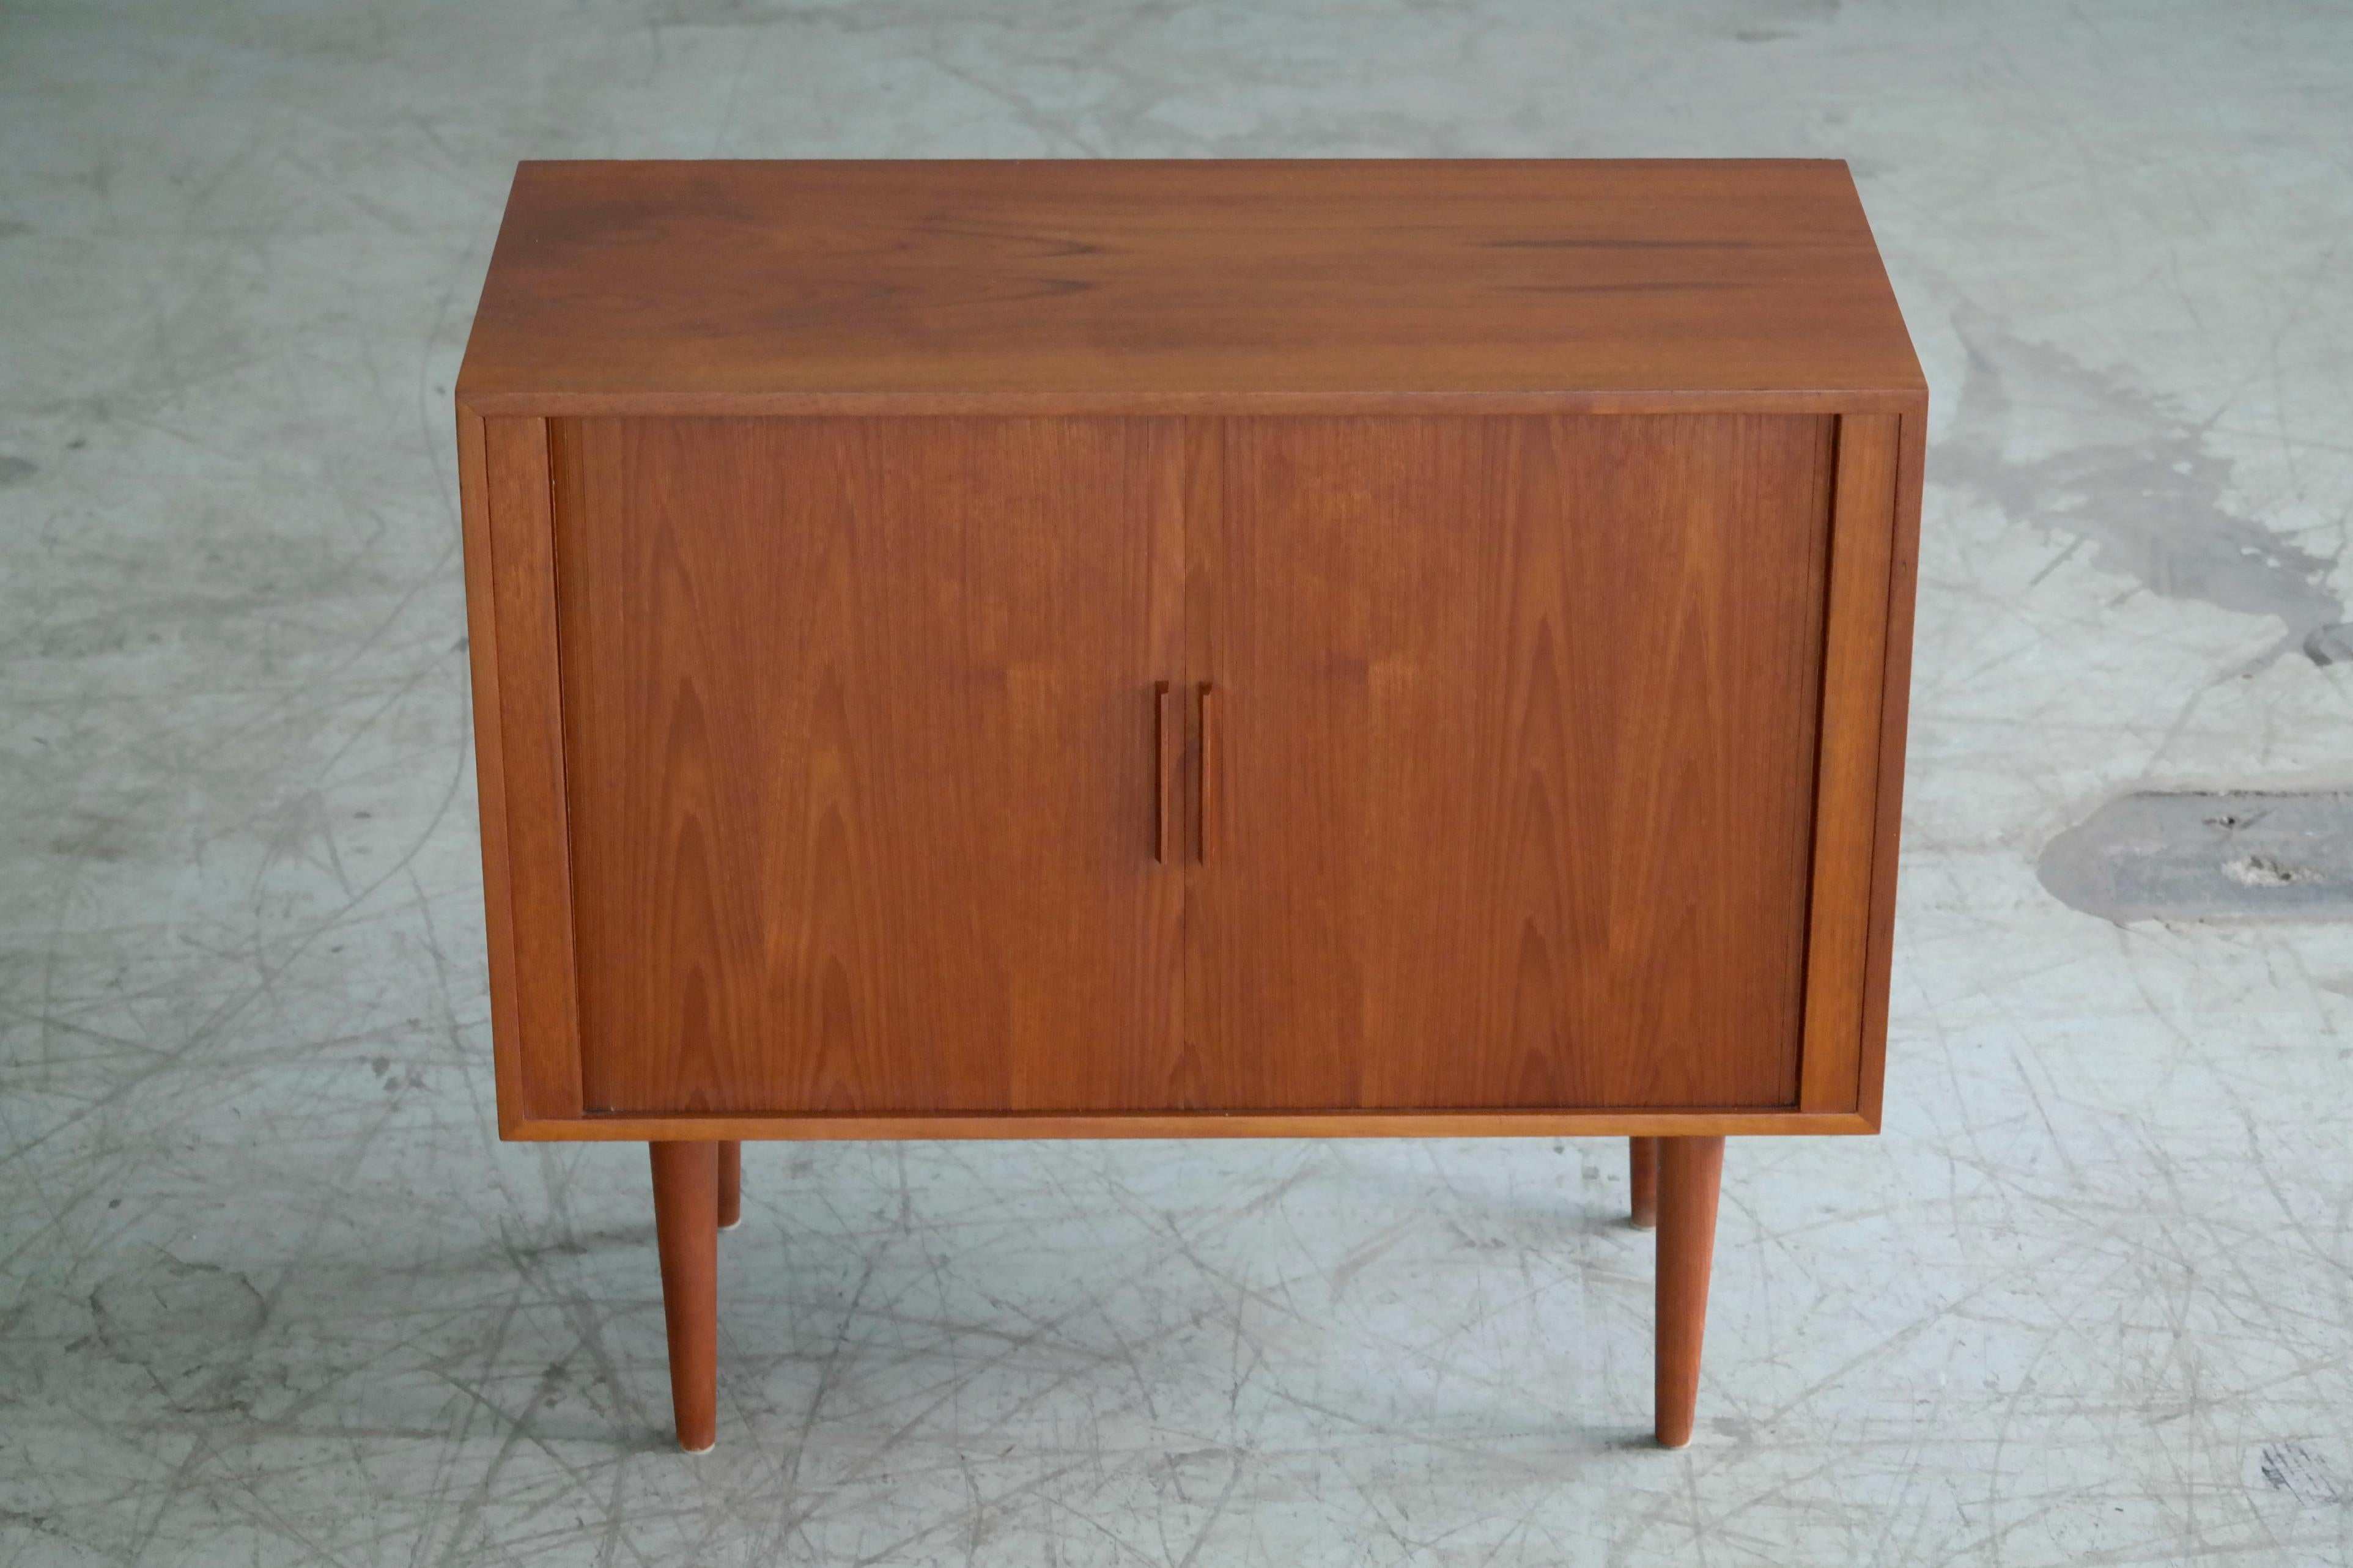 Very nice and elegant 1960s teak sideboard and media console designed by Kai Kristiansen. Inside shelves have inserts for organizing and storage of vinyl records. However, these inserts are removable and adjustable hence the piece can function as